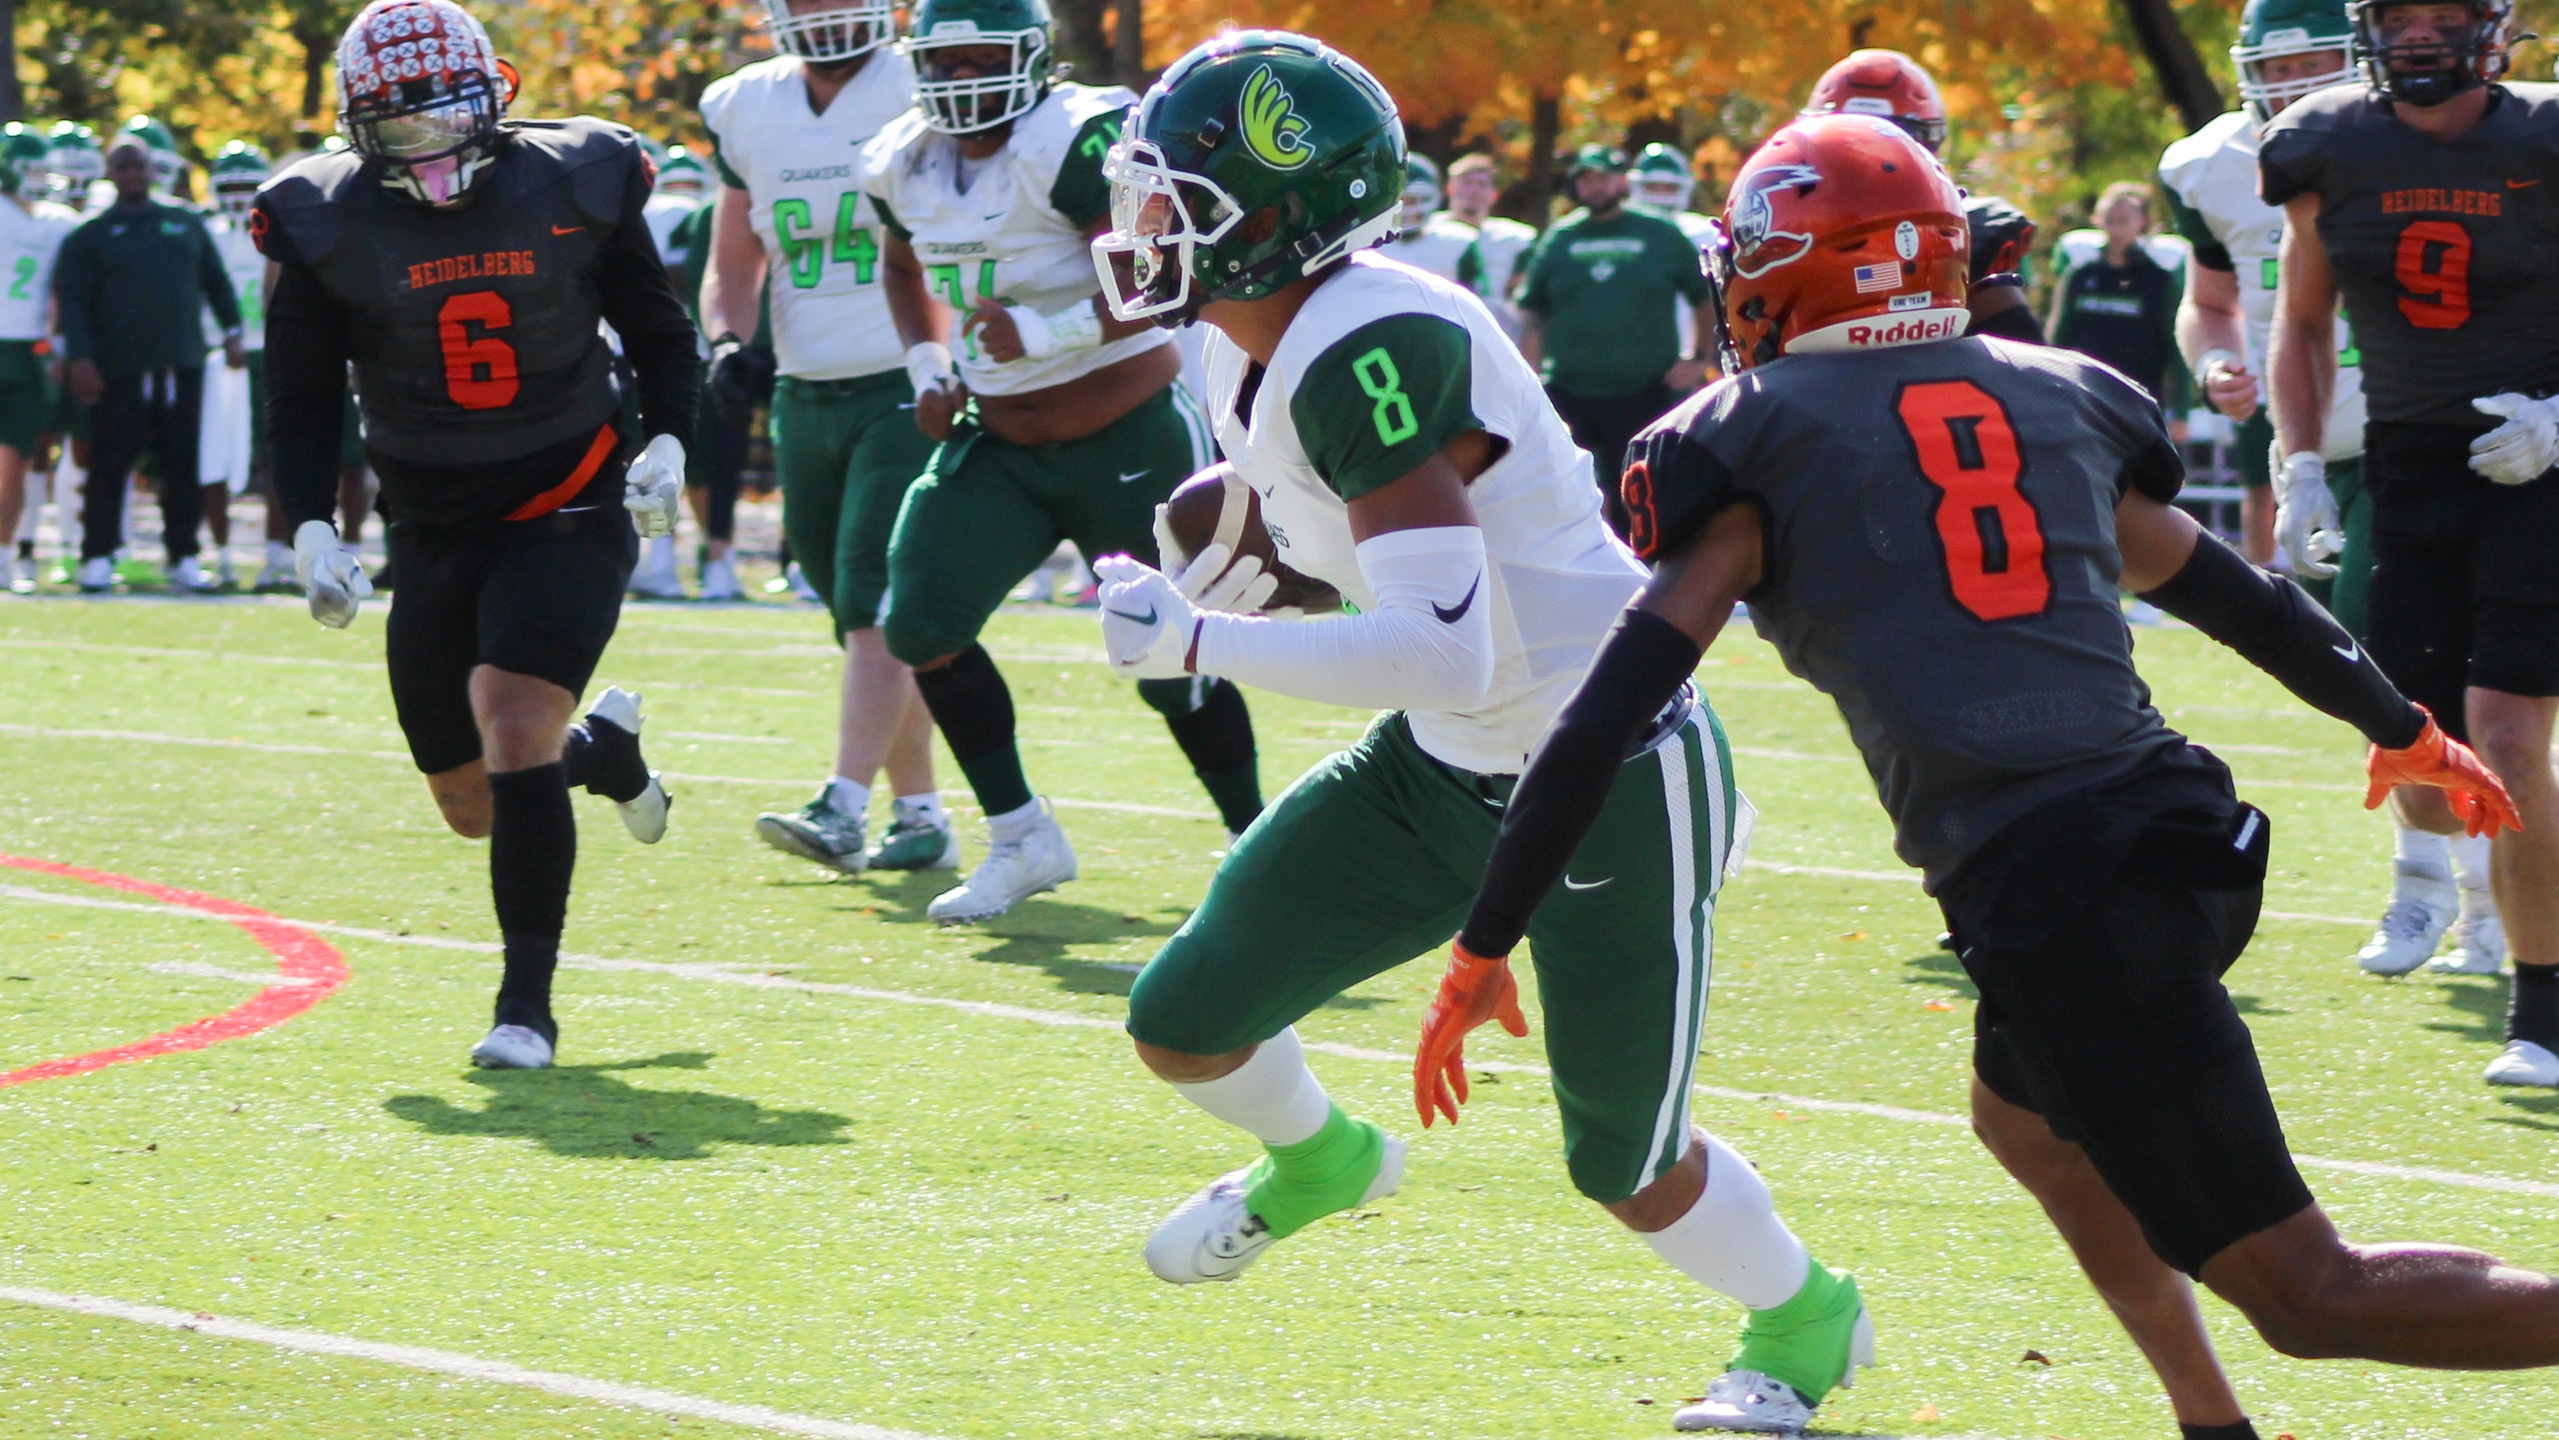 Larimer Throws Five Touchdowns in Loss at Heidelberg